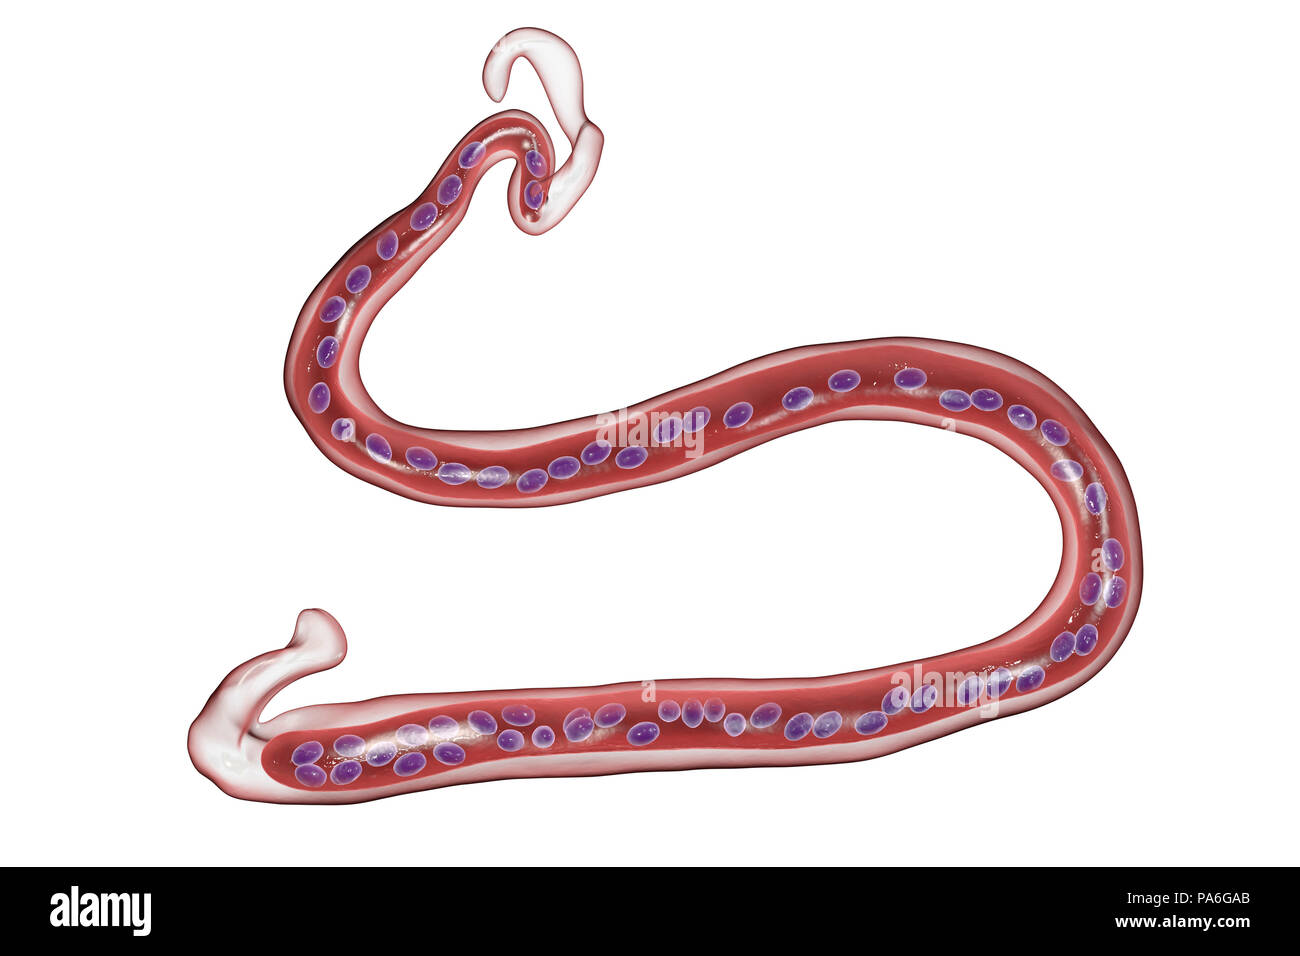 Computer illustration of Brugia malayi, a parasitic nematode worm and cause of human lymphatic filariasis (elephantiasis). Brugia malayi is one of five types of nematode worm which cause human filariasis. They are spread by blood- sucking insects. The worms then invade the human lymphatic system to produce thousands of larvae that spread around the body. Stock Photo